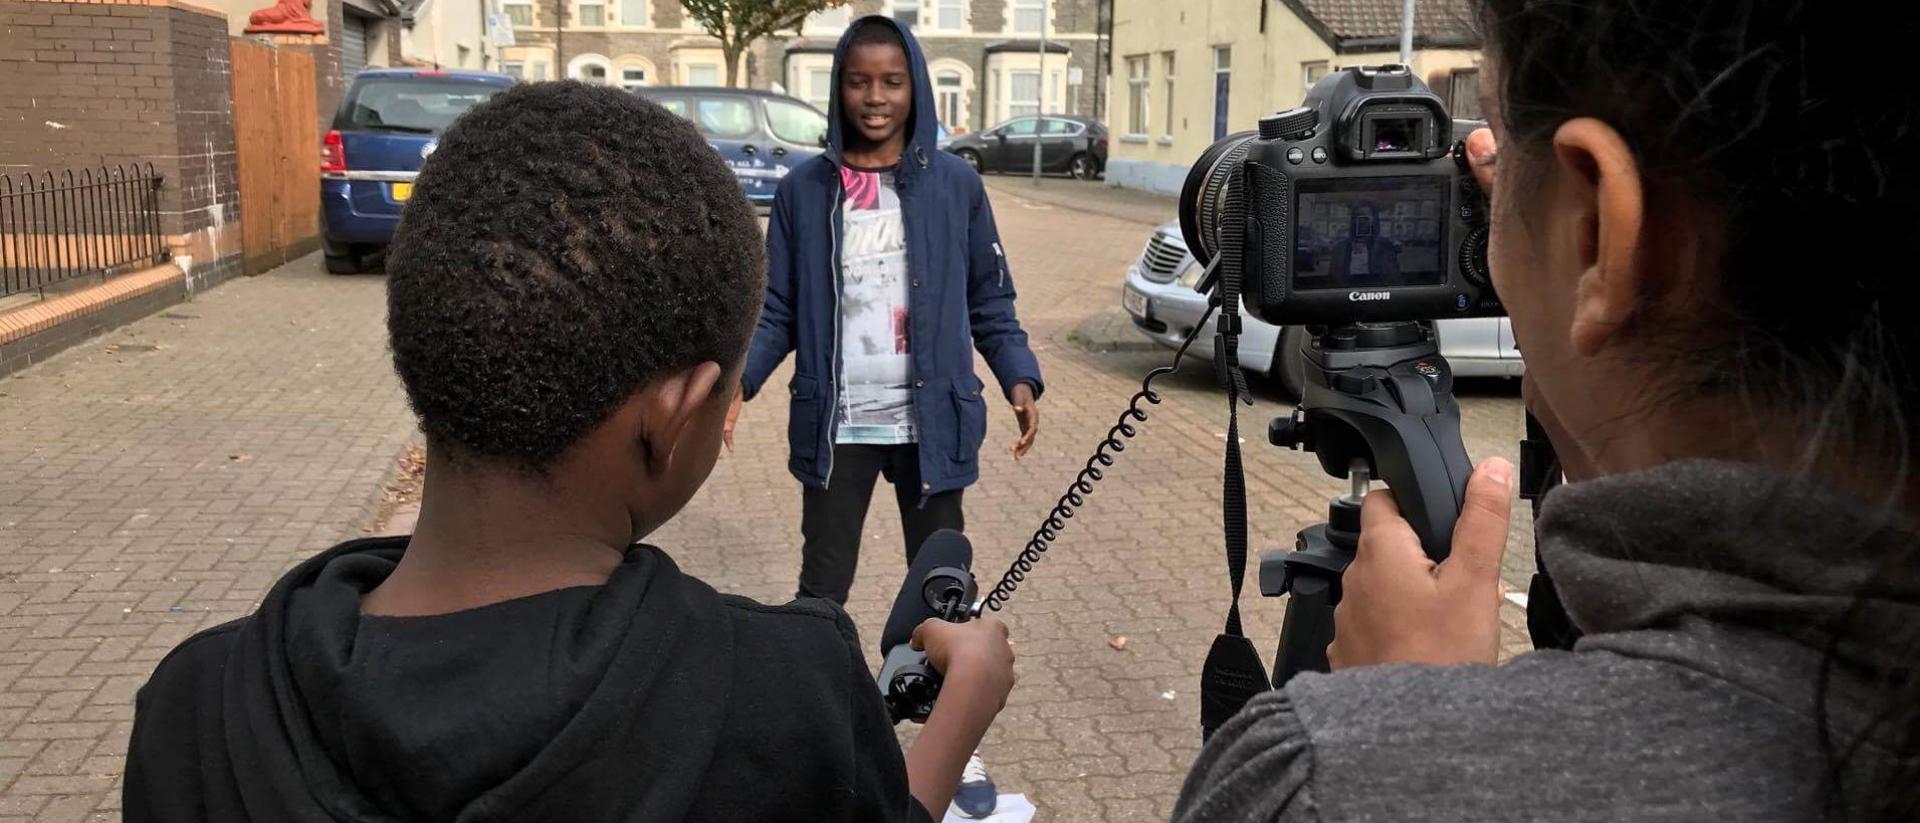 Young people making a film